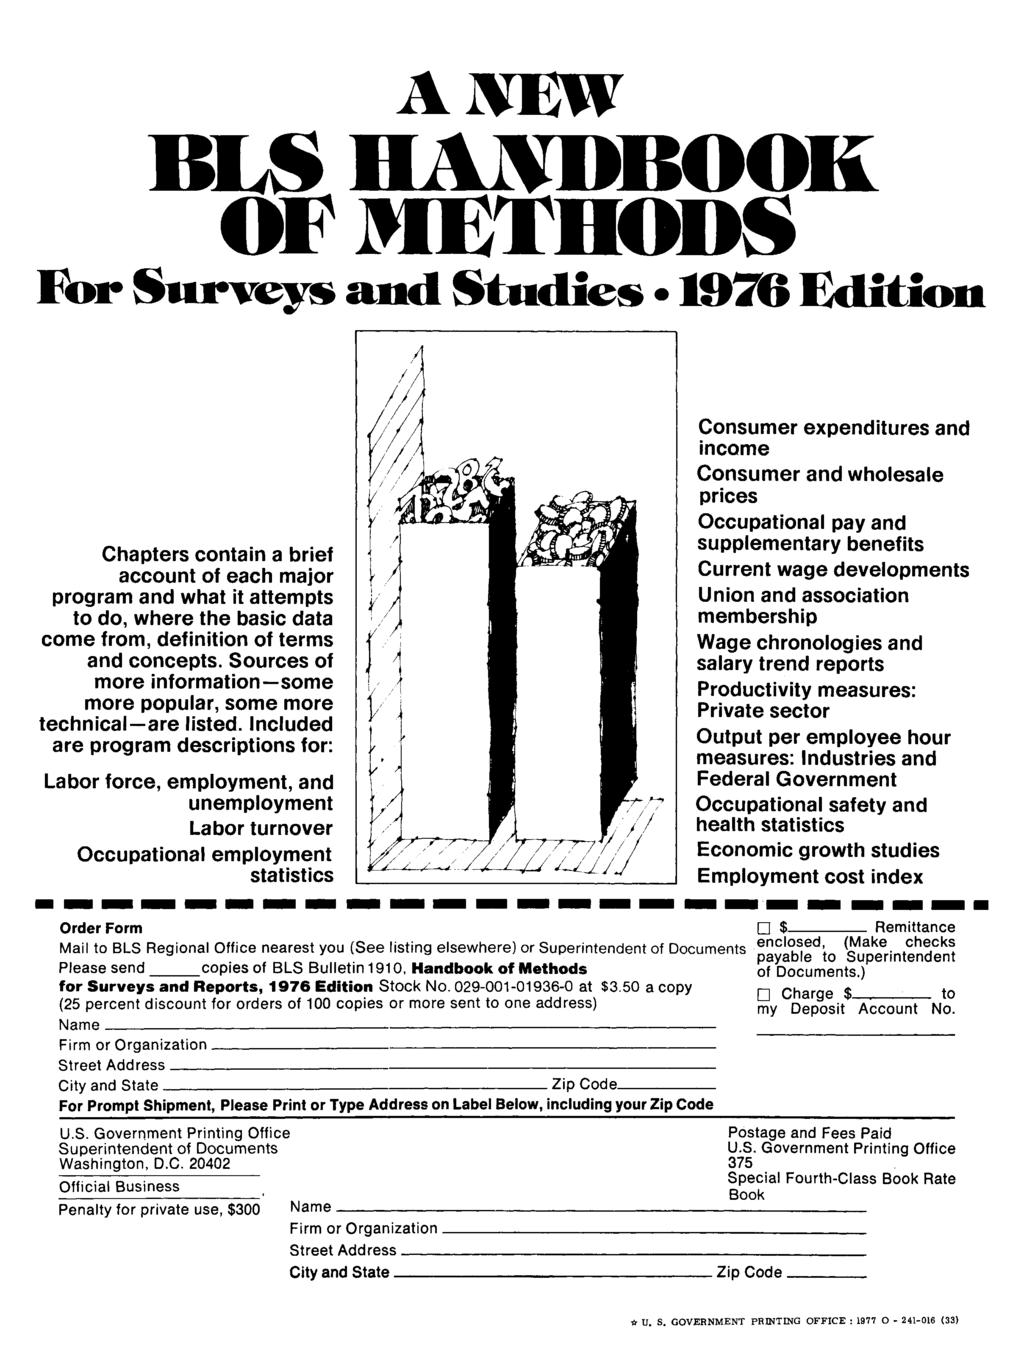 ANEW B IS HANDBOOK O FM Em O D S Dm* Surveys an d Studies 1976 E dition Chapters contain a brief account of each major program and what it attempts to do, where the basic data come from, definition